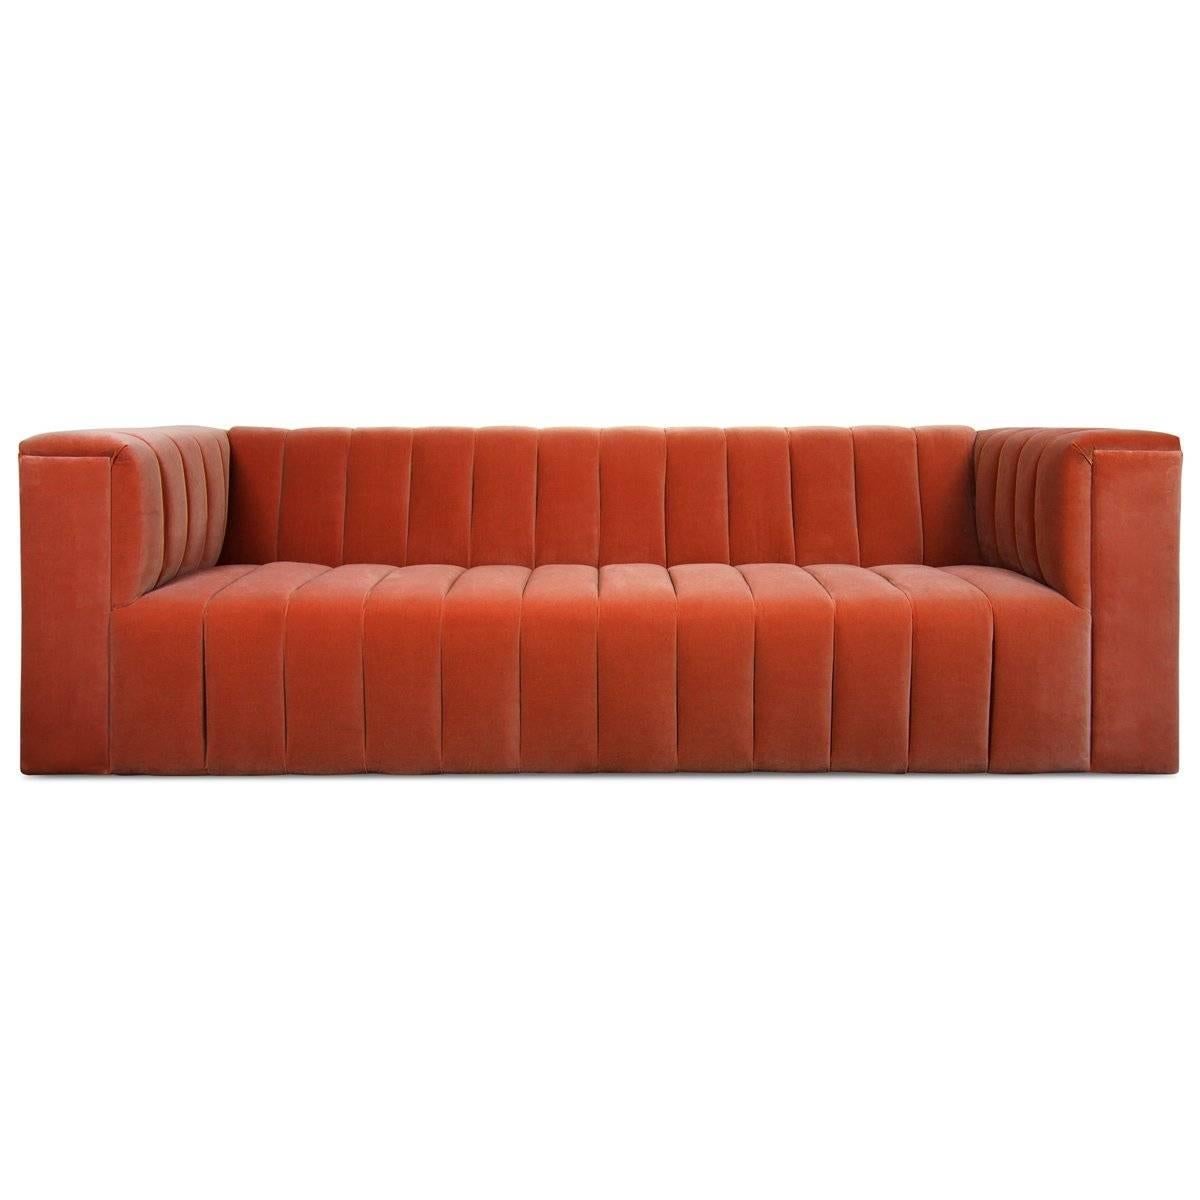 Elevate the level of comfort and style within your home with the Monaco sofa in lush velvet in Paprika. Though the deep color and bold design lend this sofa the ability to stand alone, none can deny the brilliance and style it will add to any room.